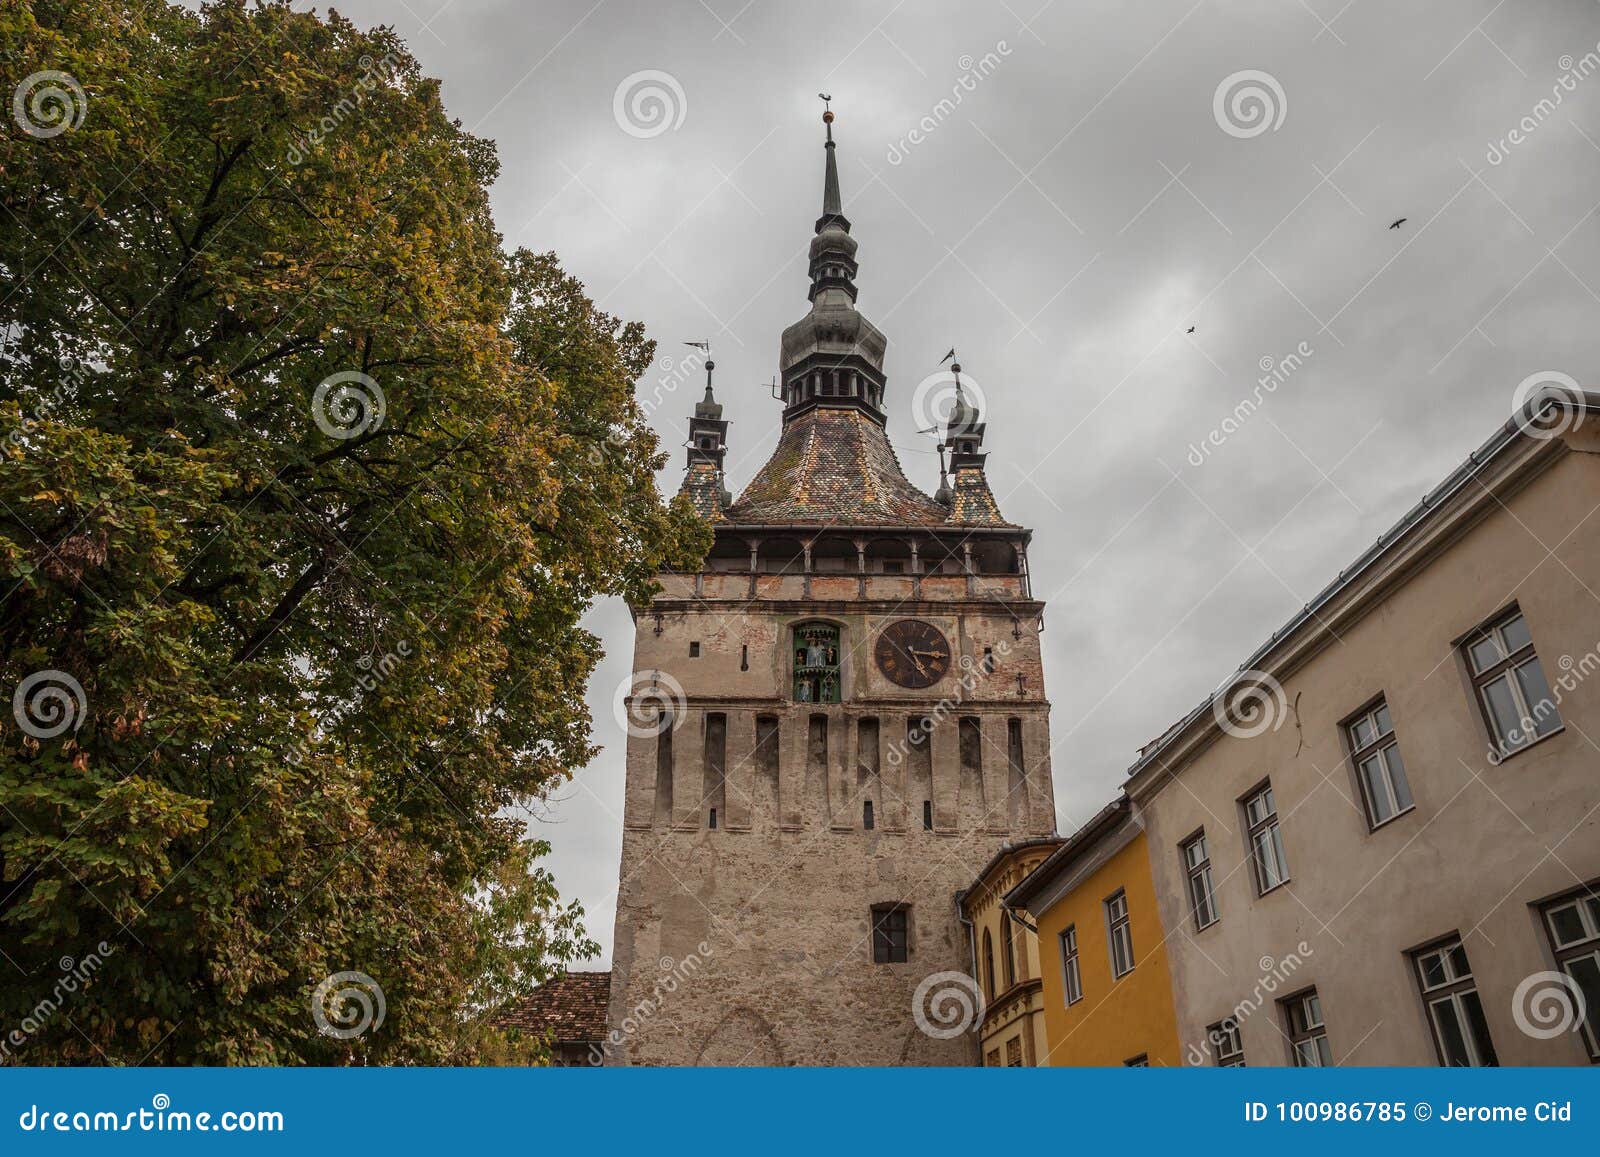 sighisoara clock tower turnul cu ceas during a cloudy fall afternoon. it is the main entrance of sighisoara castle, in romania